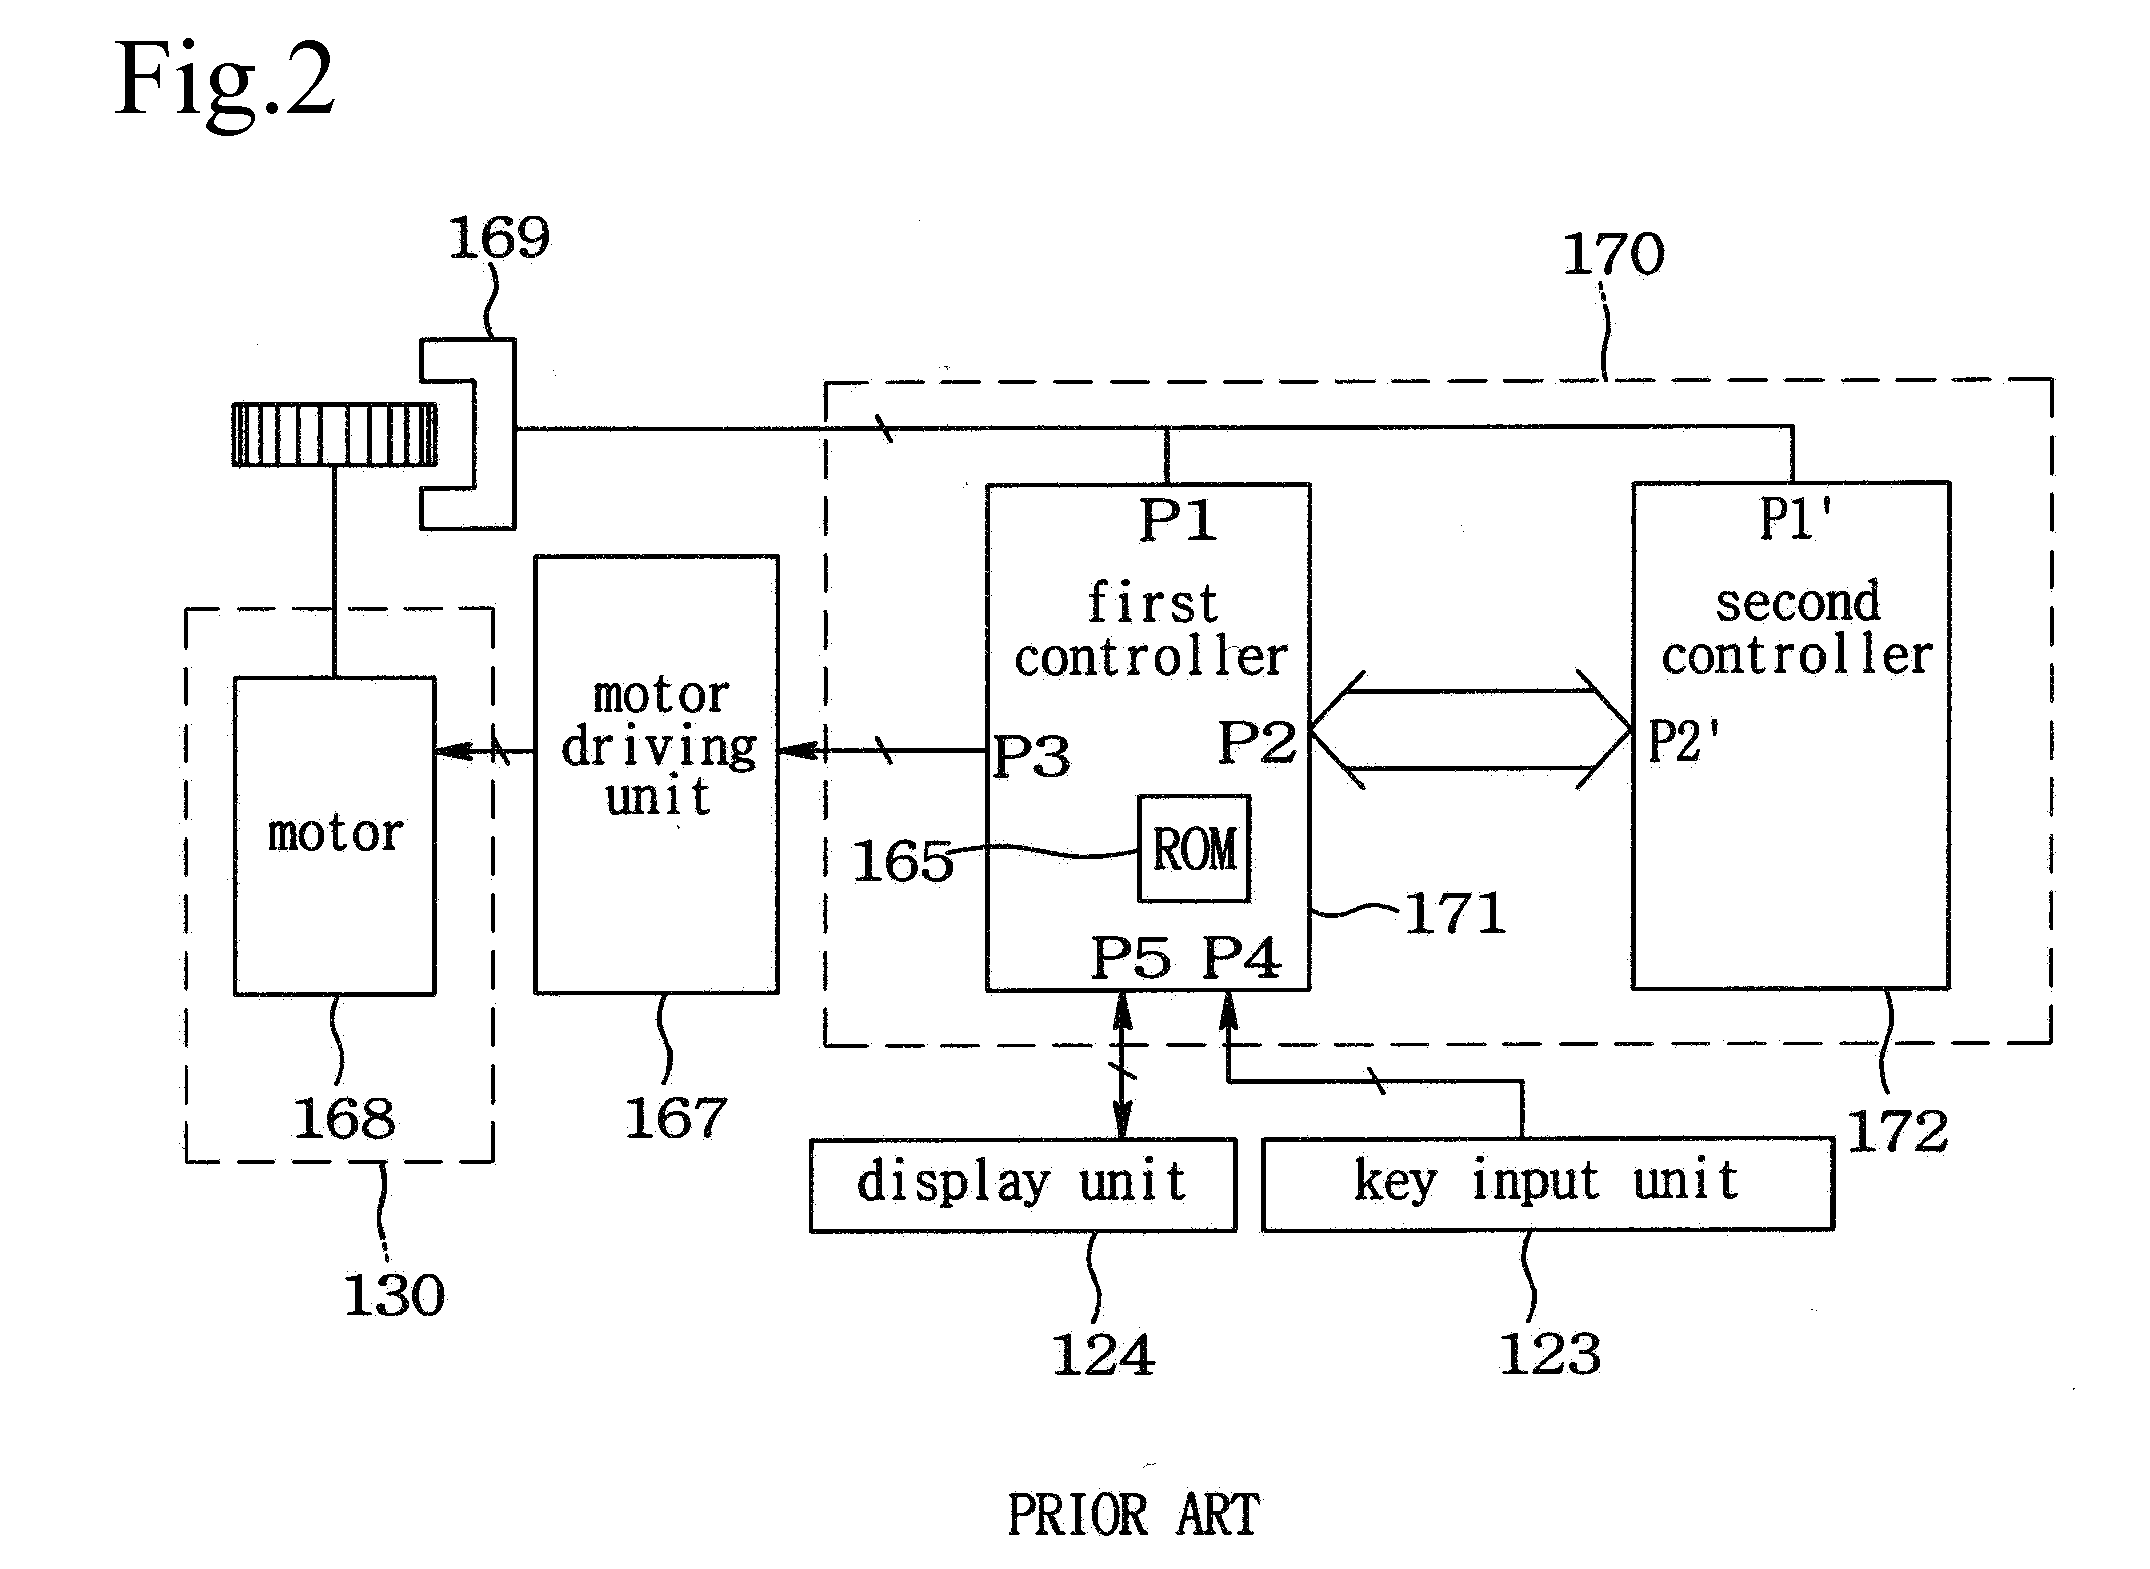 Method for controlling insulin pump using bluetooth protocol